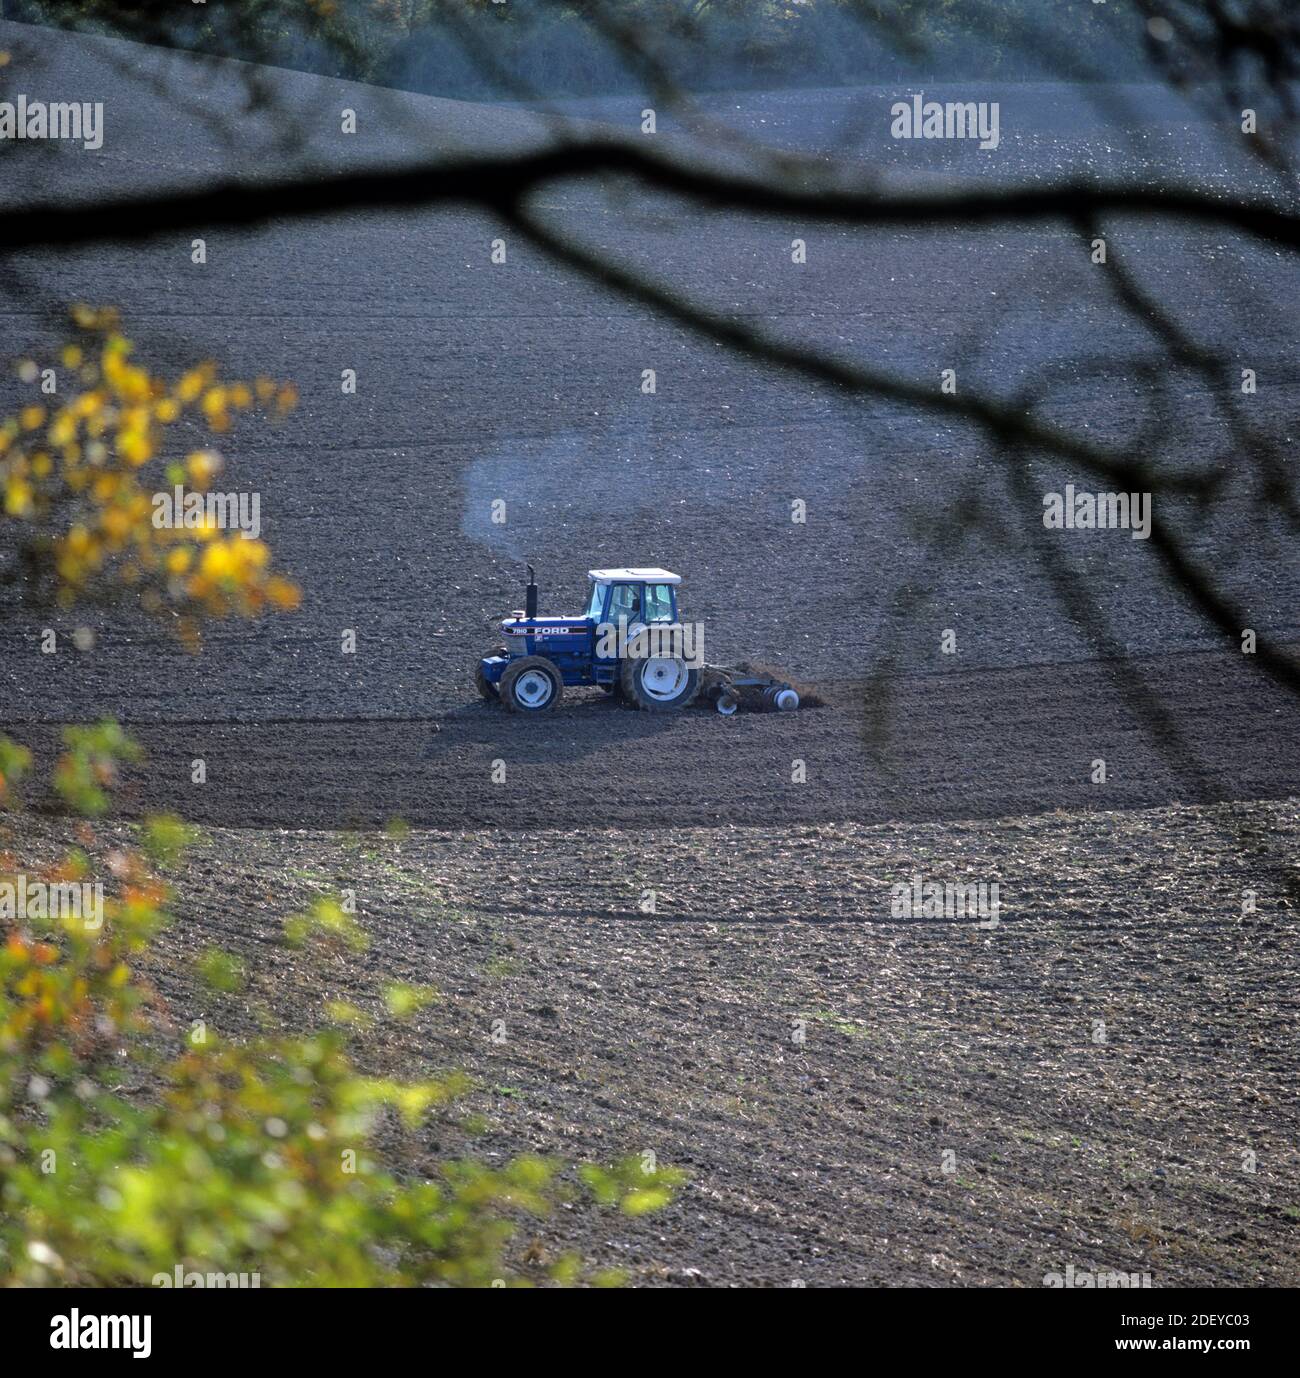 Looking through tree branches at a small Ford tractor disc harrowing a ploughed field to prepare for autumn planting, Berkshire, November Stock Photo